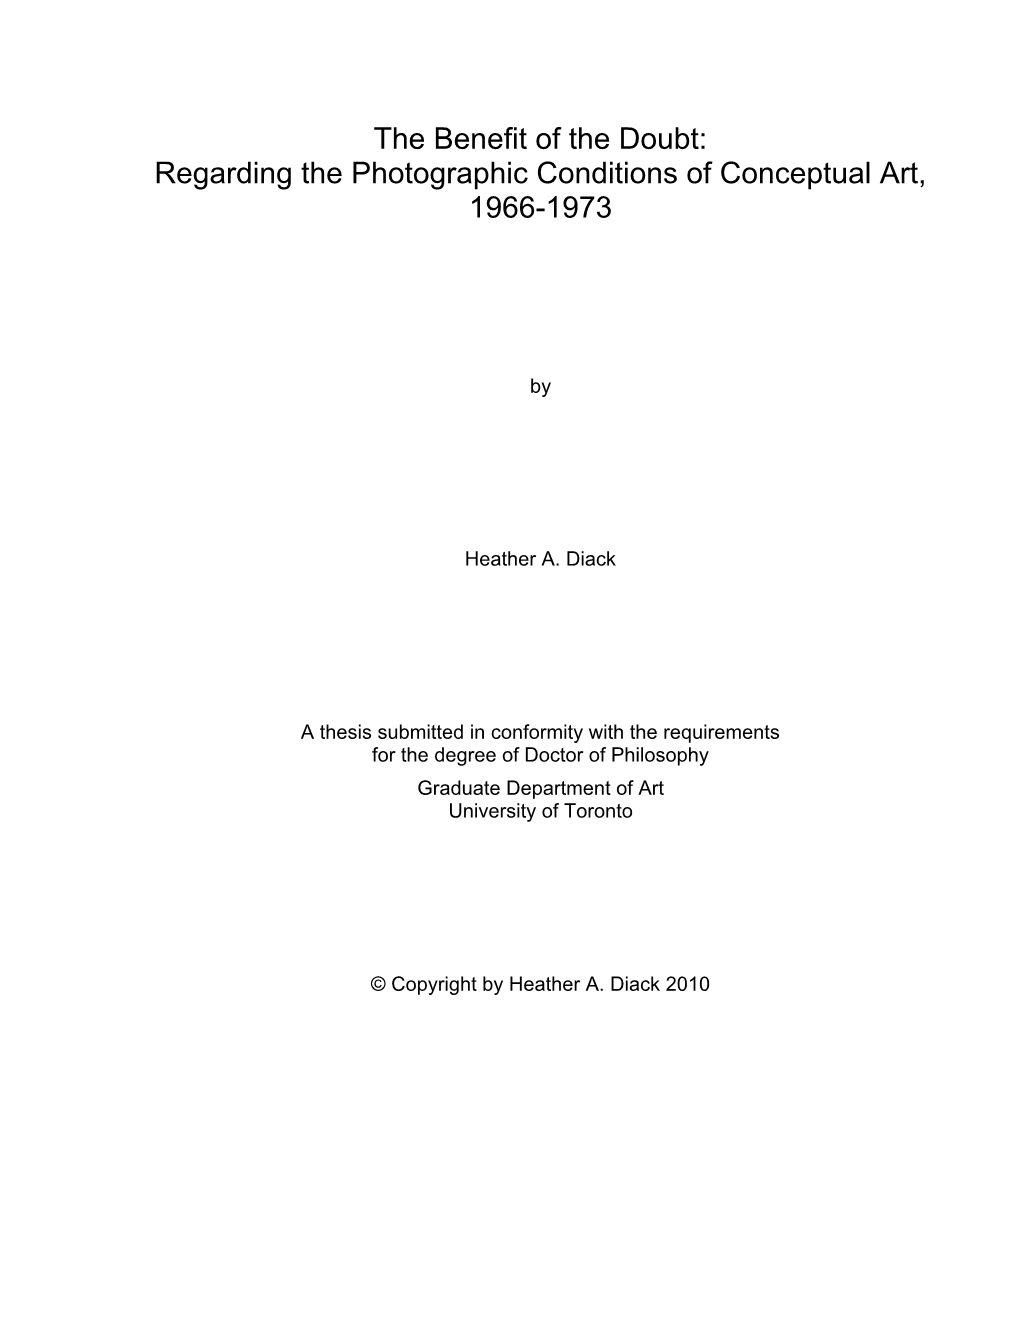 The Benefit of the Doubt: Regarding the Photographic Conditions of Conceptual Art, 1966-1973